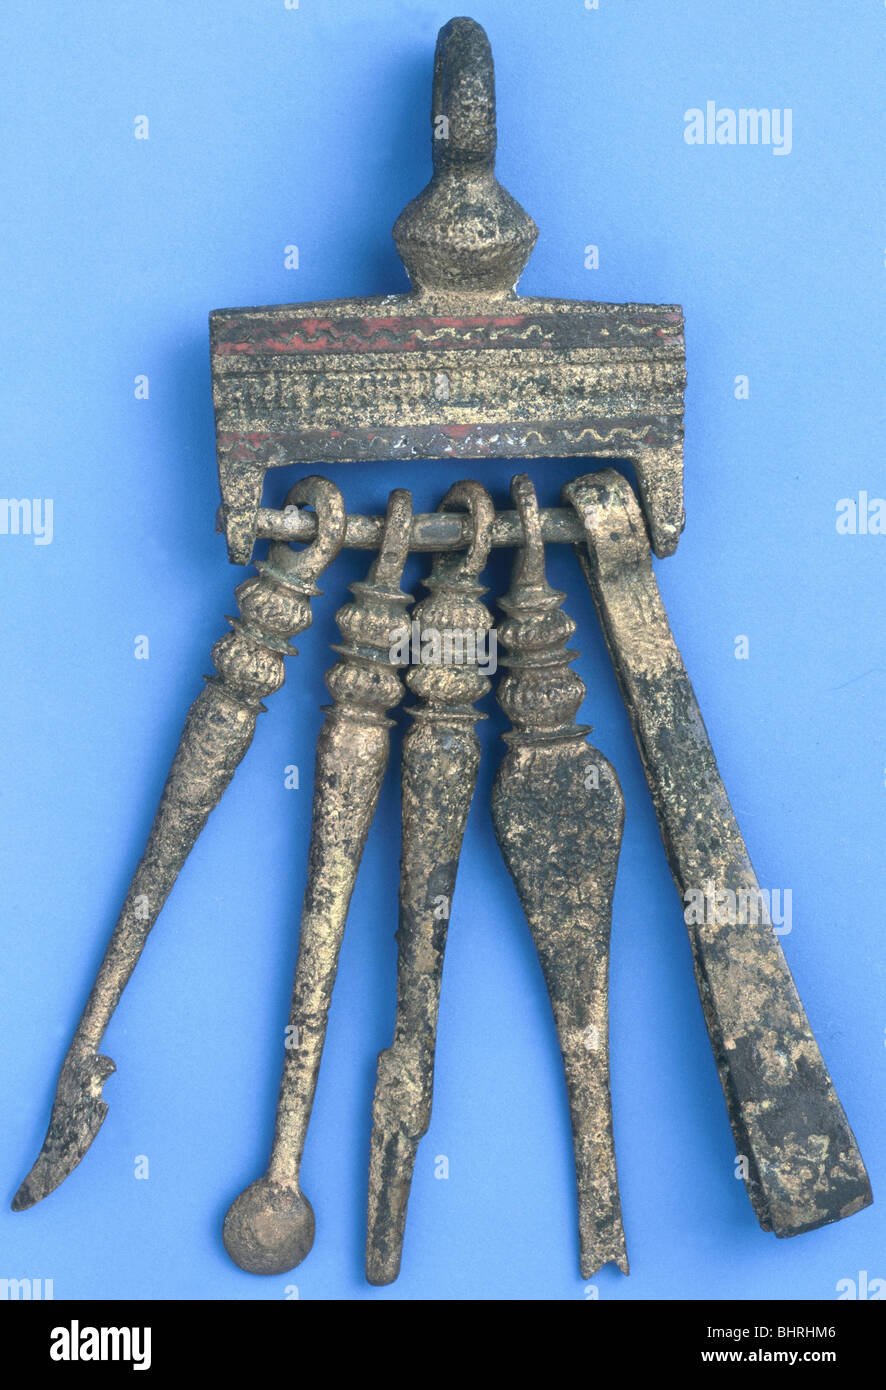 The Rapid Development of Technology in Making Iron Clamps of Three Ancient  Temples in the Archaic and Classical Period